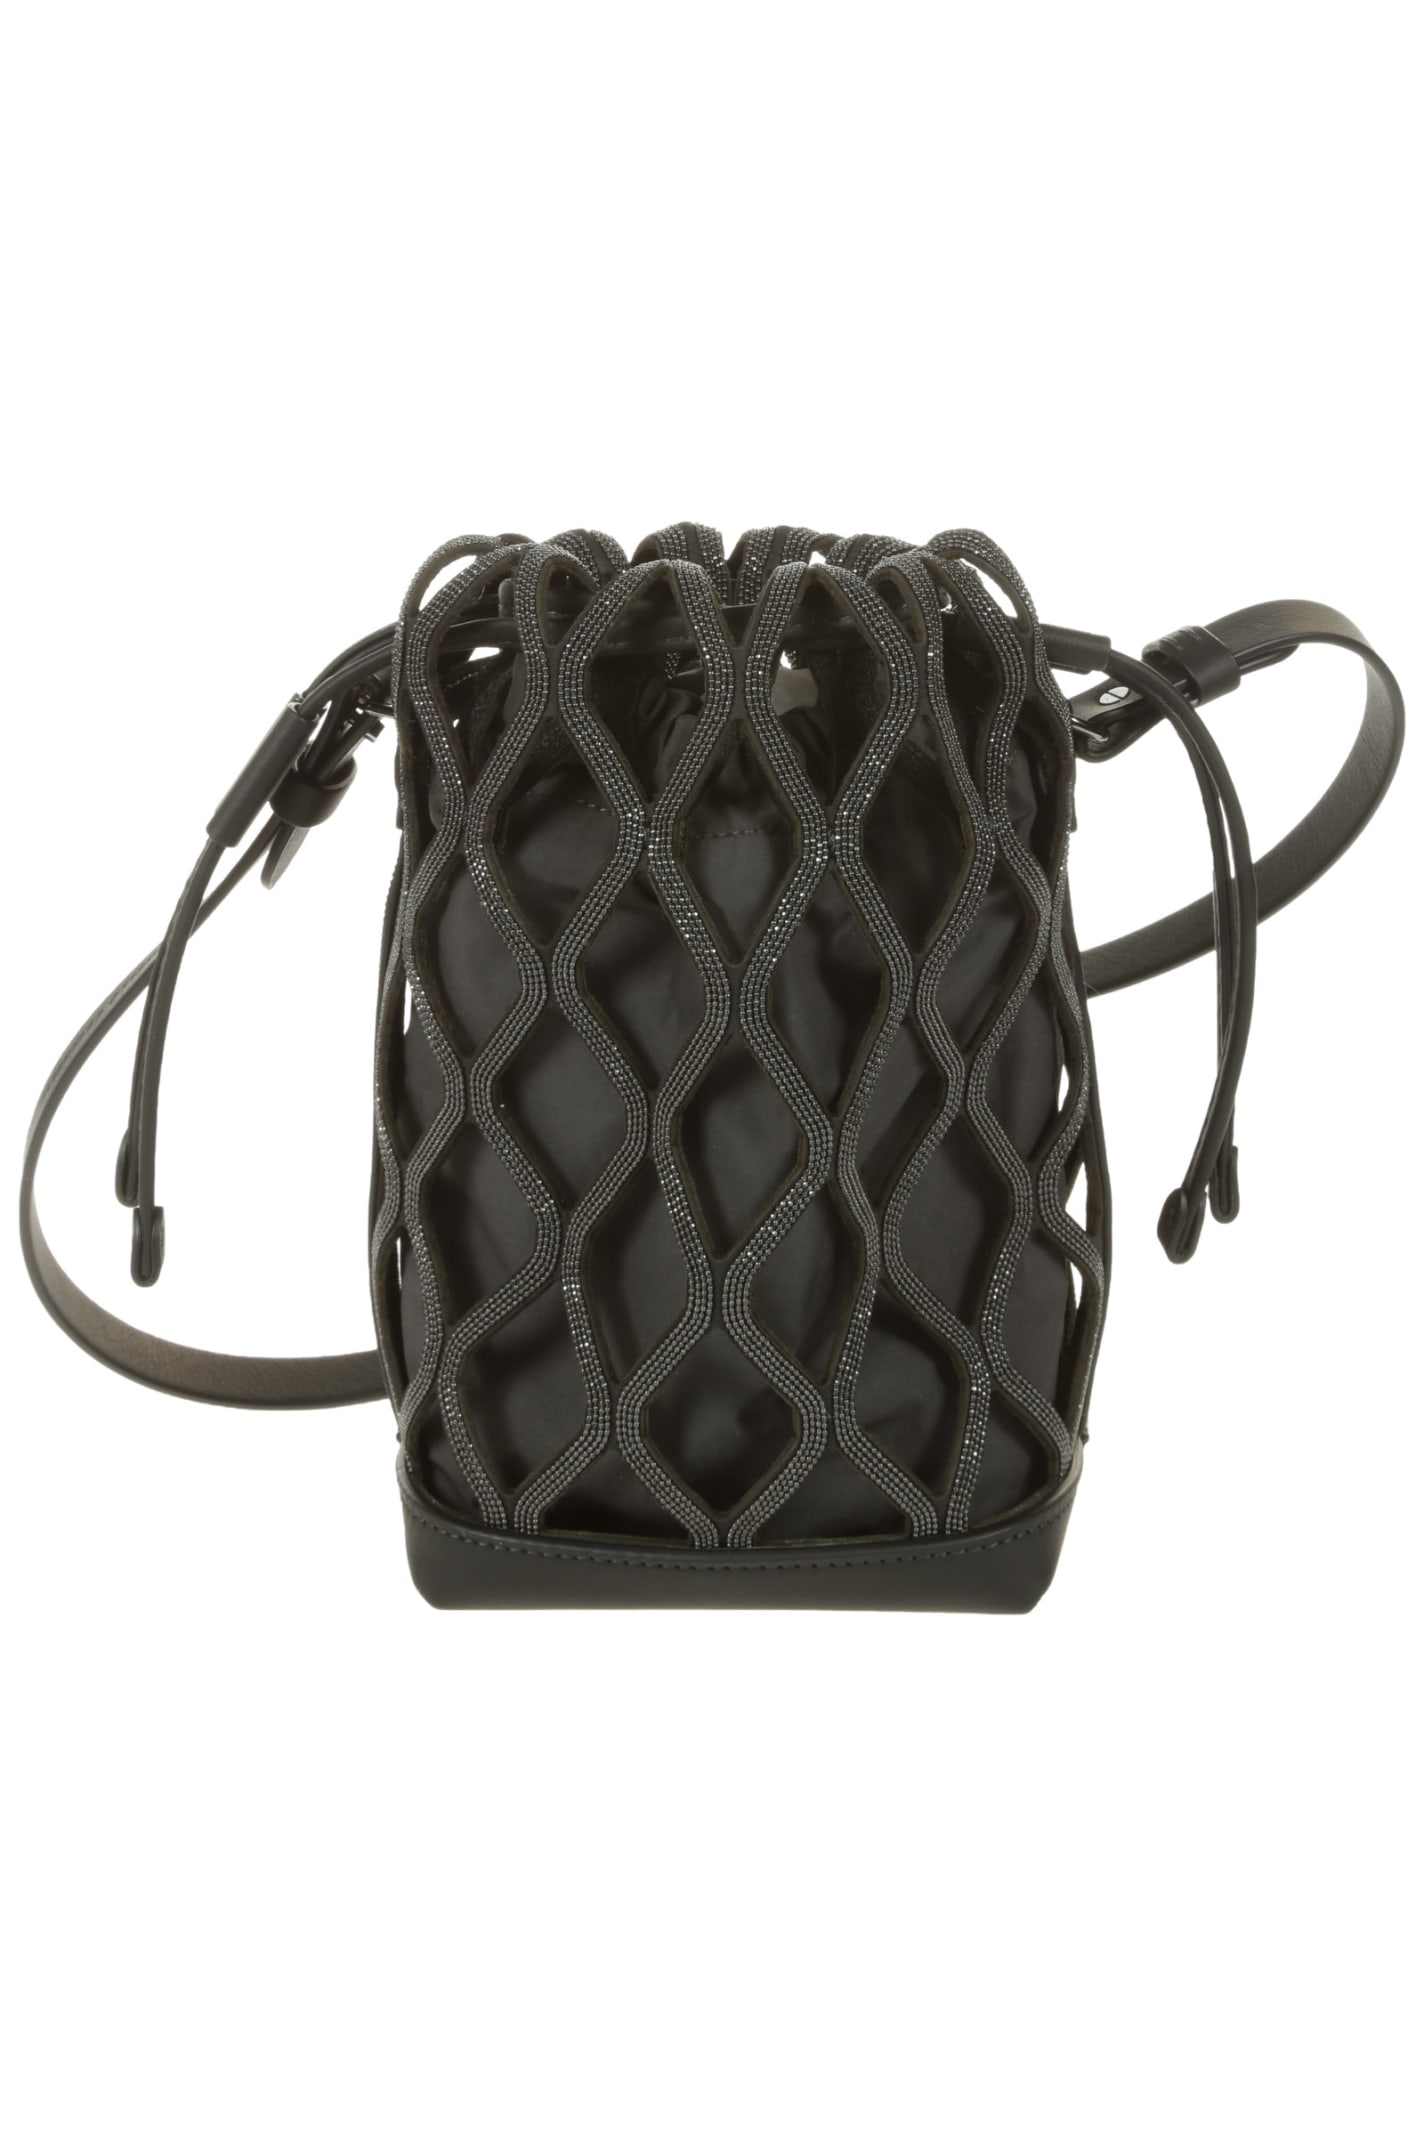 Brunello Cucinelli Bead Embellished Perforated Bucket Bag